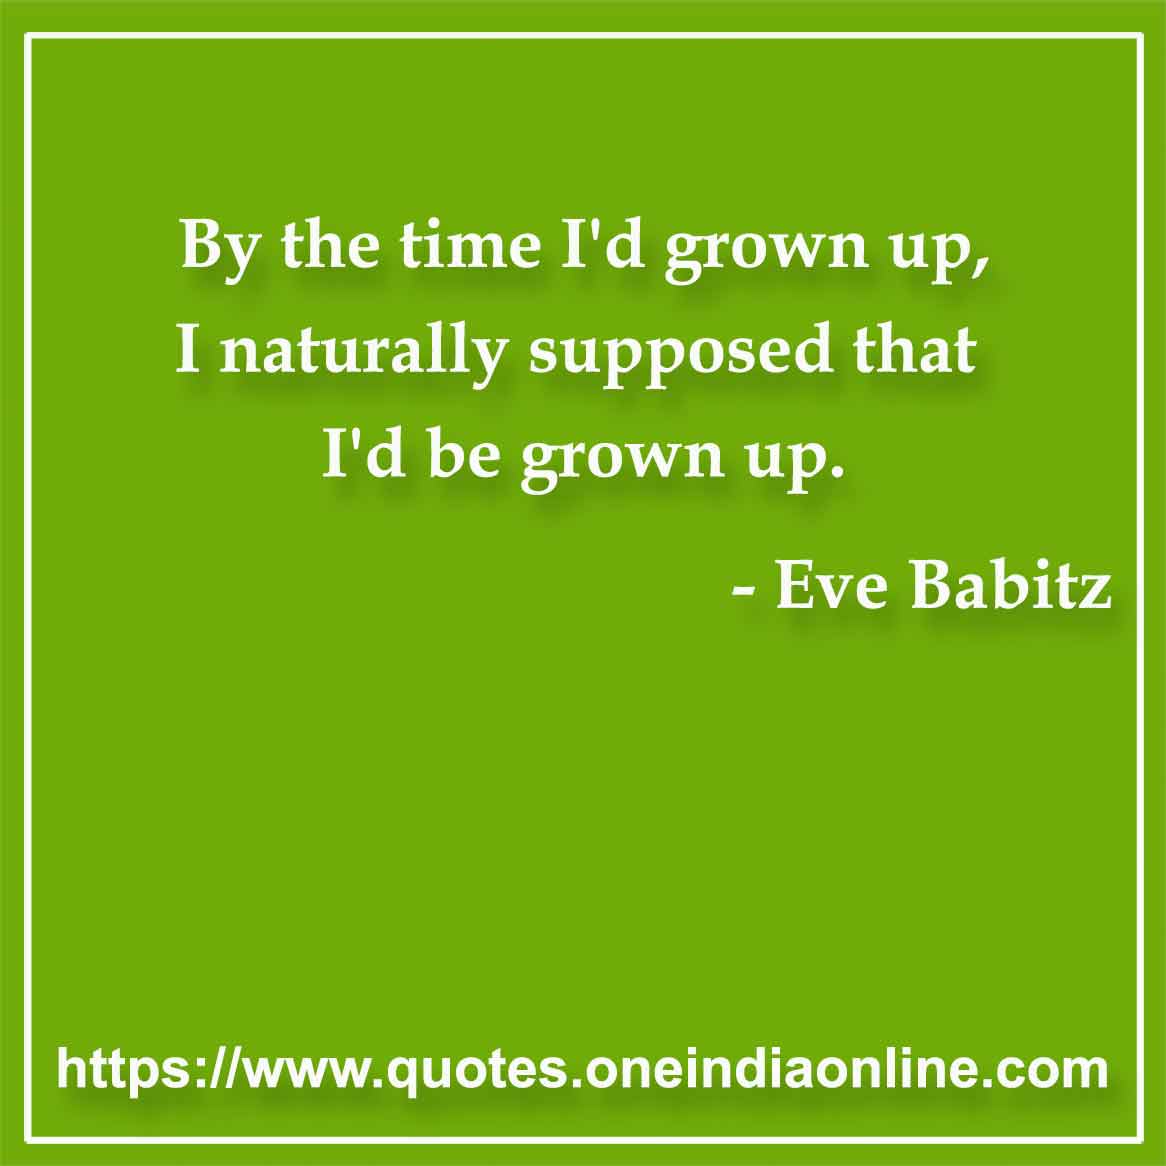 By the time I'd grown up, I naturally supposed that I'd be grown up.

- Maturity Quotes by Eve Babitz 